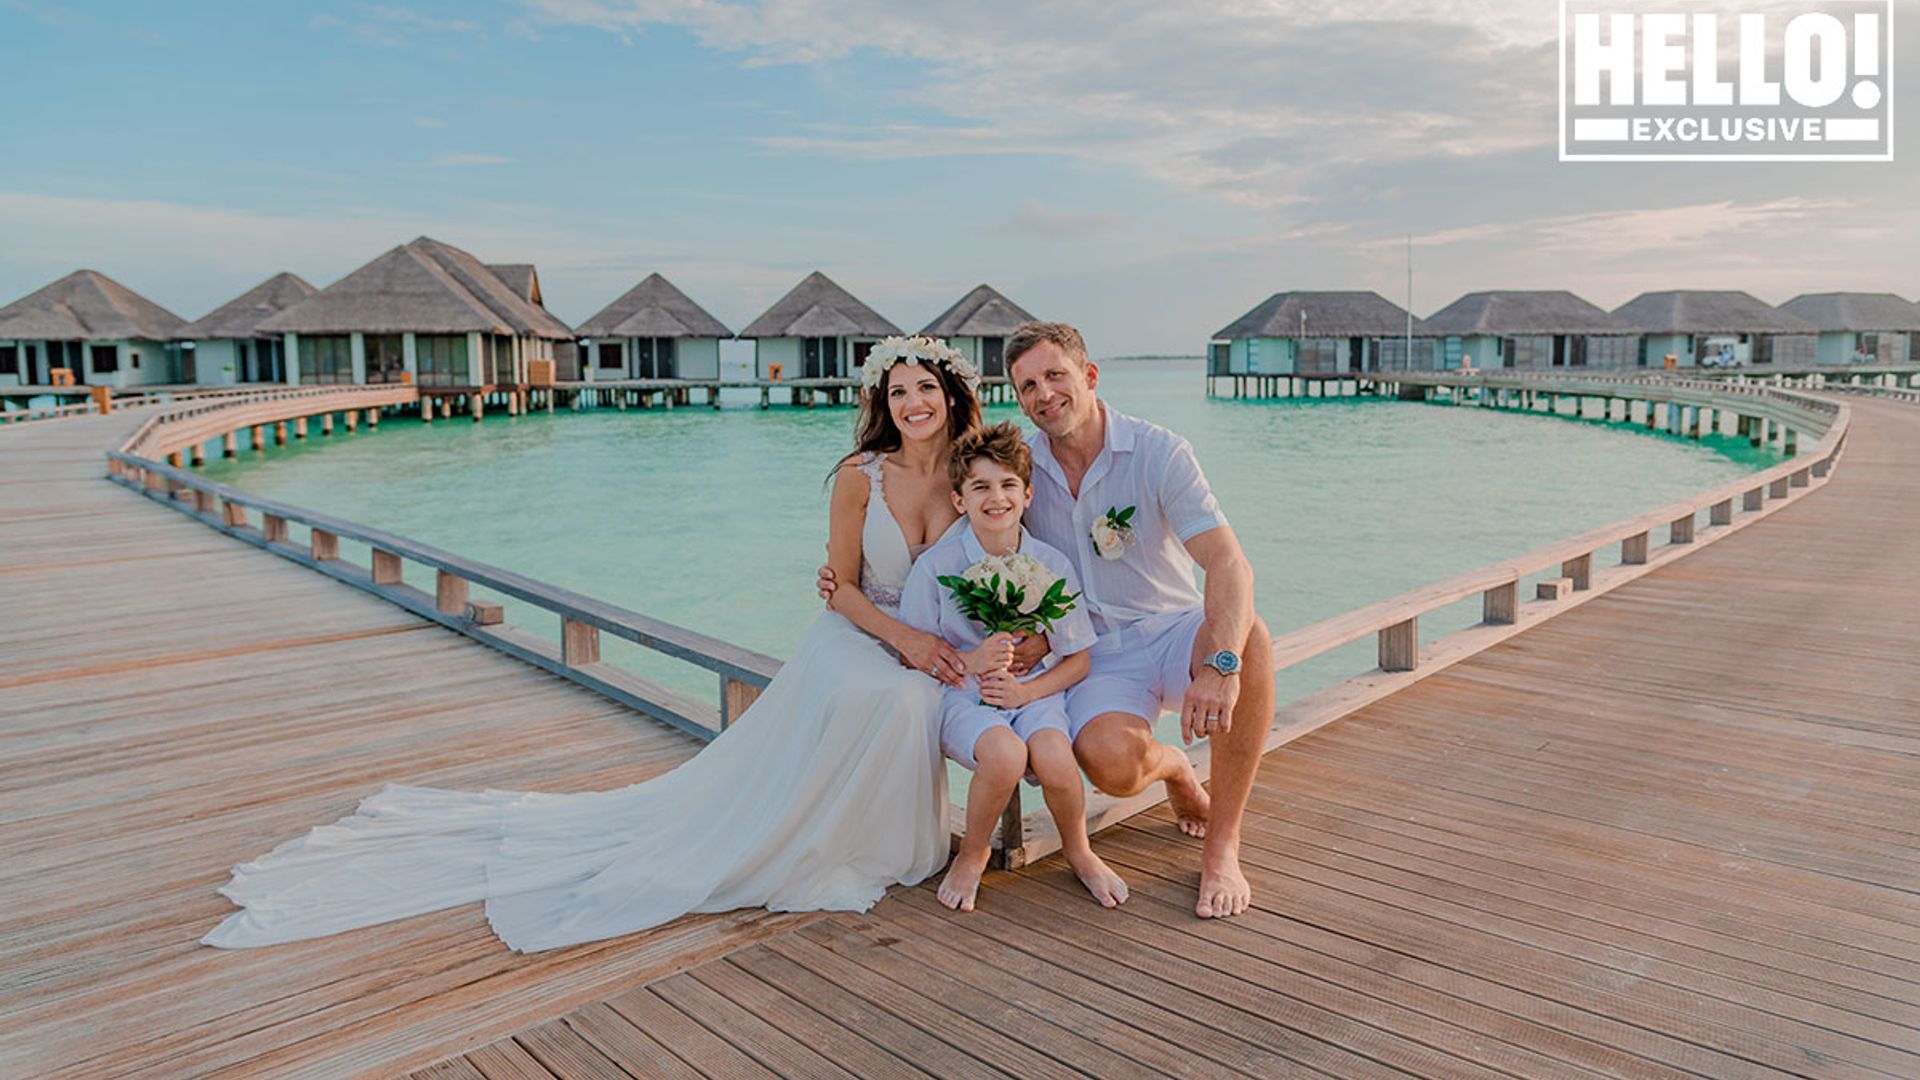 Natalie Anderson surprises husband with vow renewal in the Maldives - EXCLUSIVE